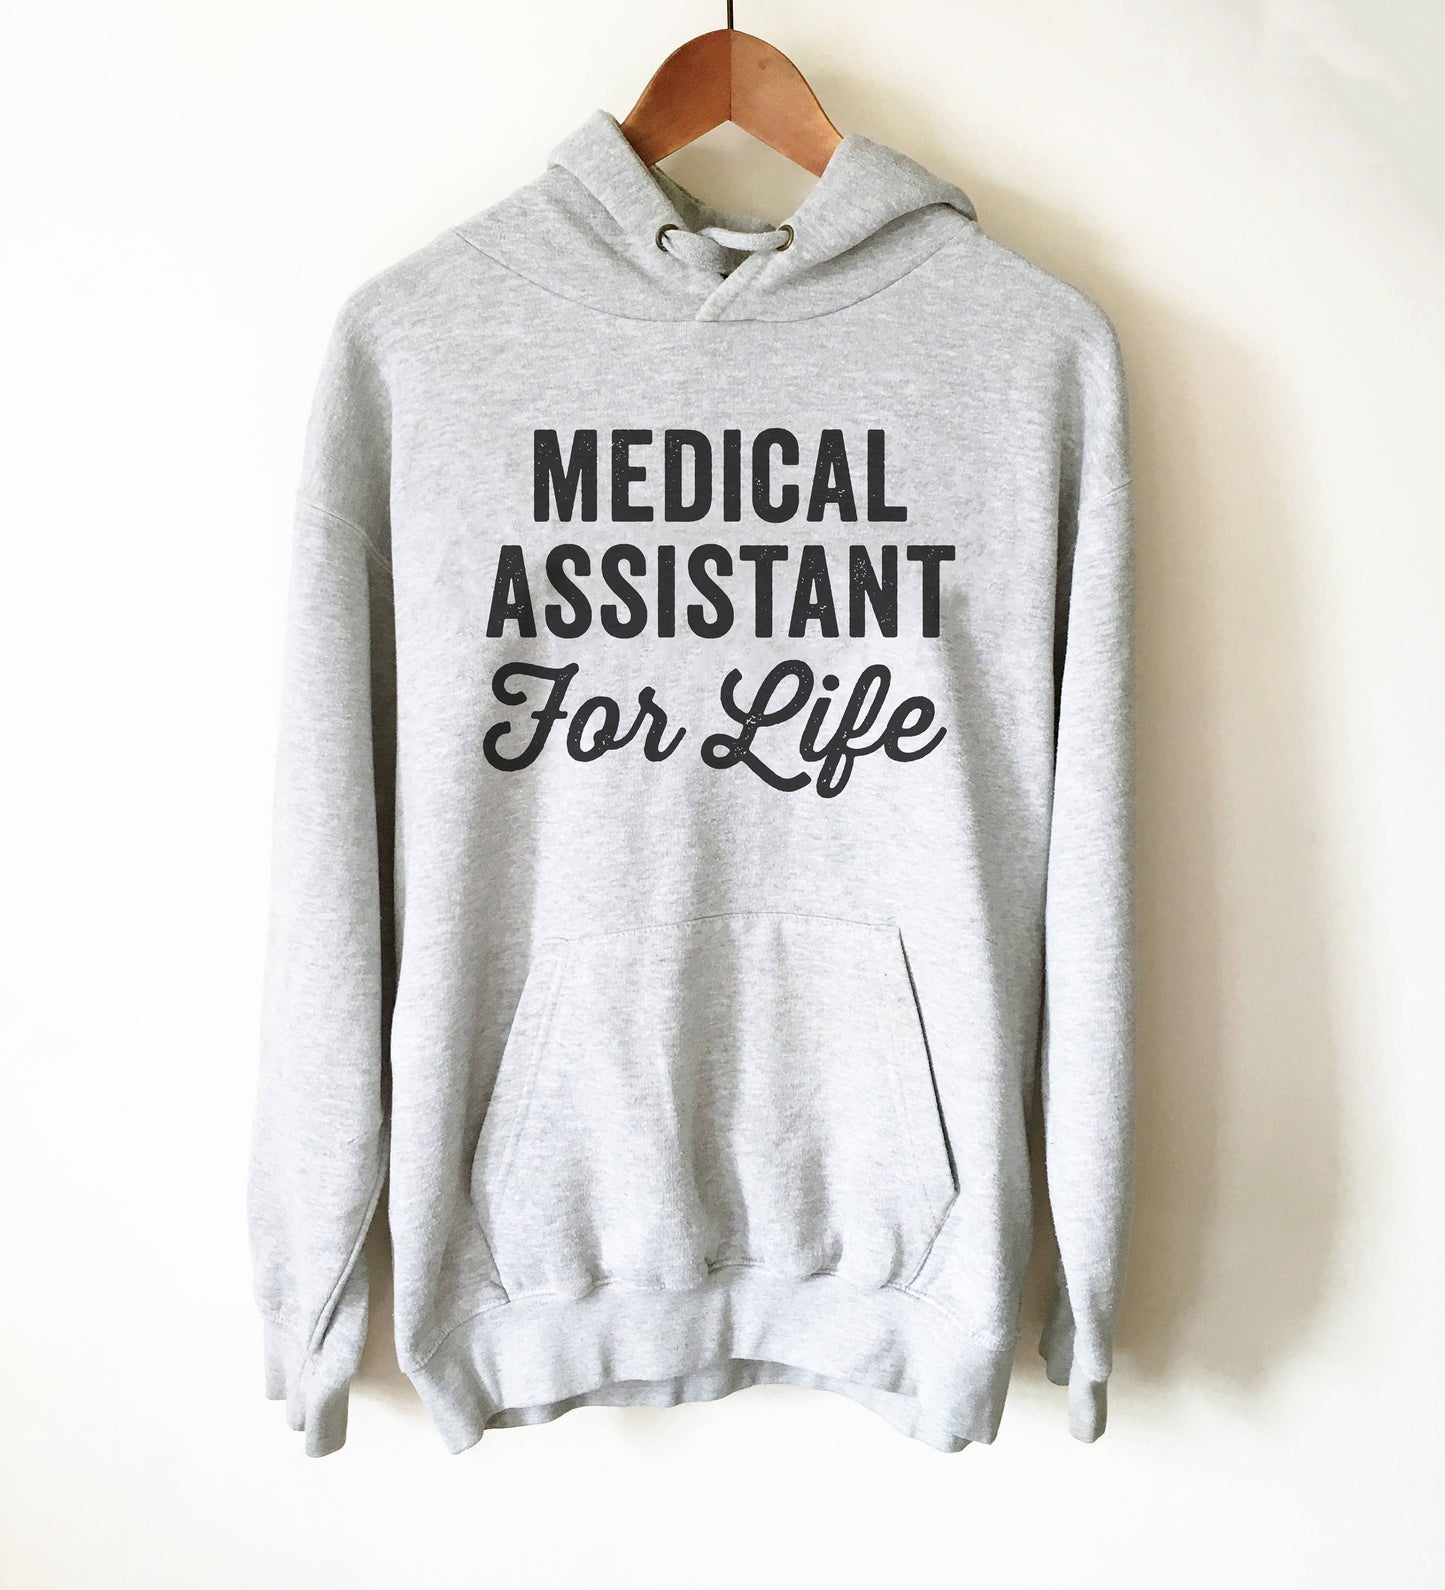 Medical Assistant For Life Hoodie - Medical Assistant, Medical Student Gift, Gift For Assistant, Med Assistant, Paraprofessional Shirt